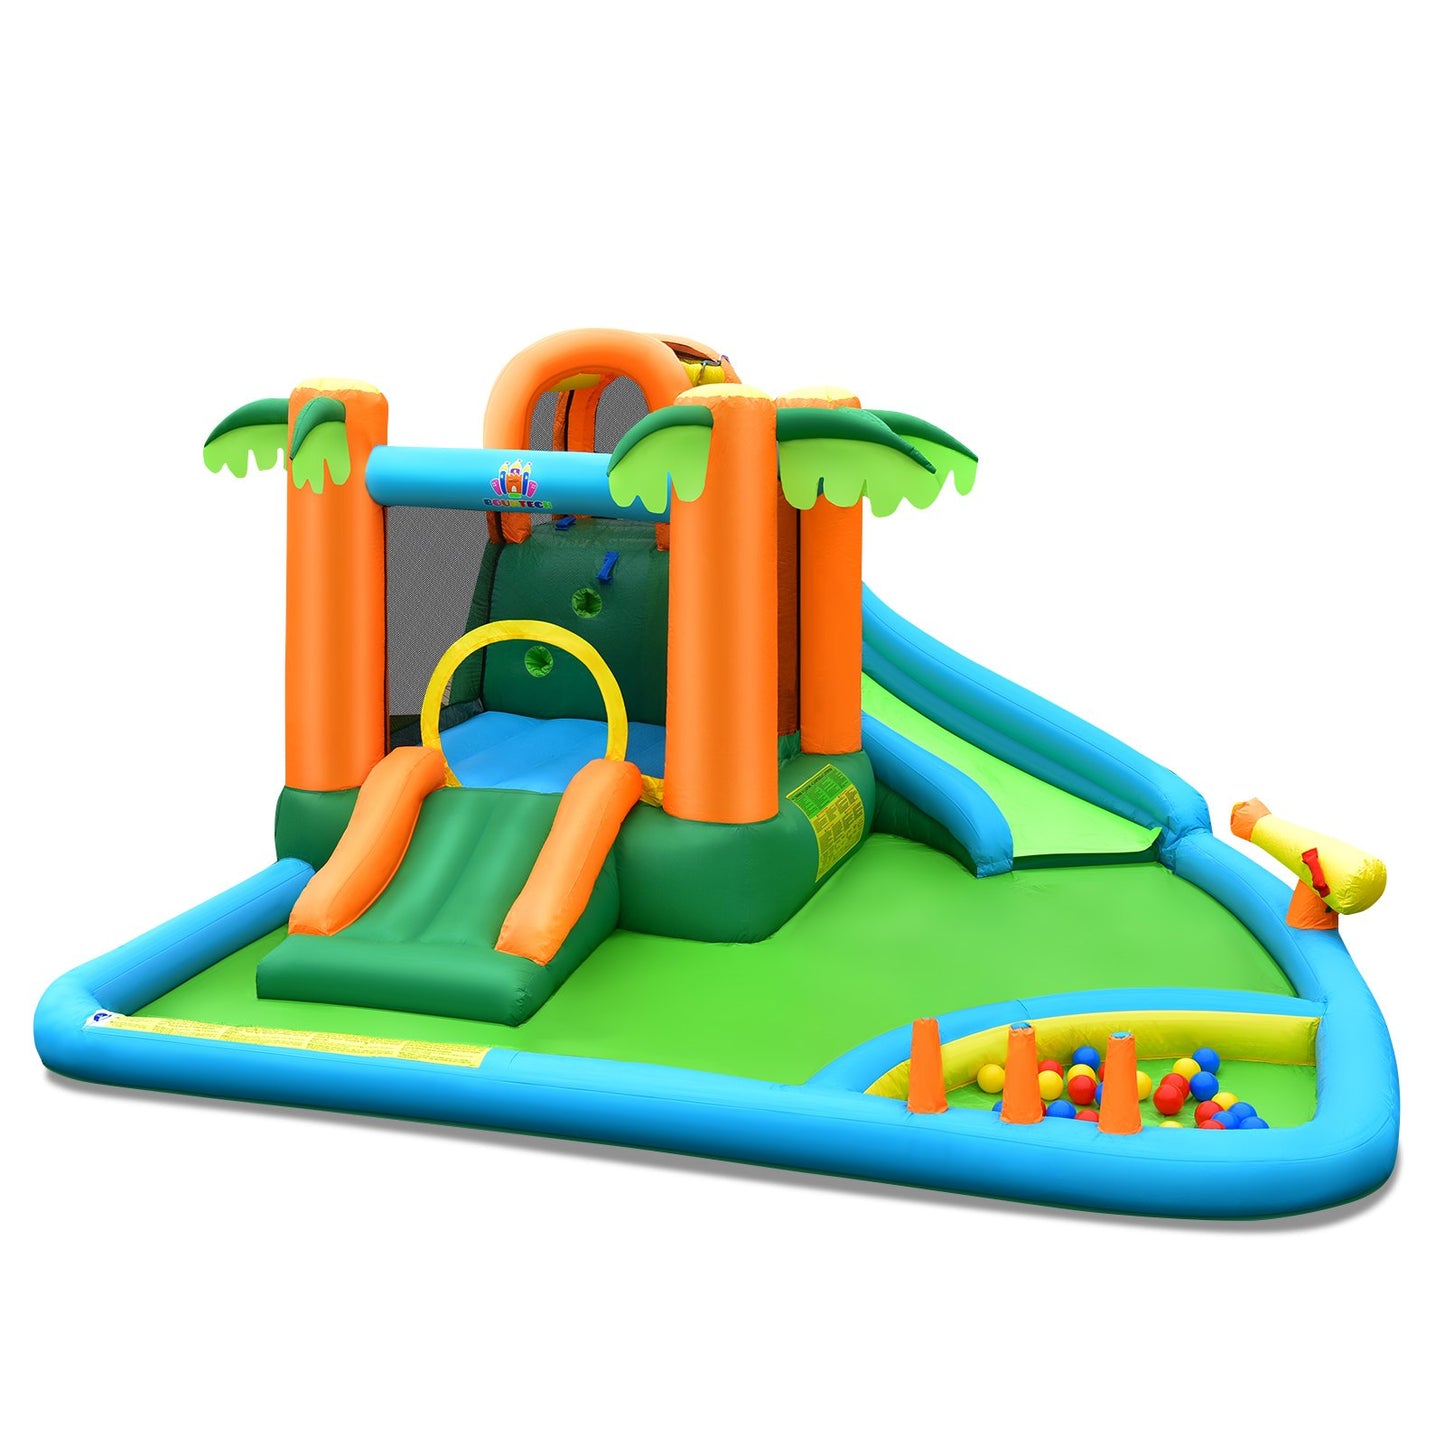 7-in-1 Inflatable Water Slide Park with Trampoline Climbing and 750W Blower, Multicolor